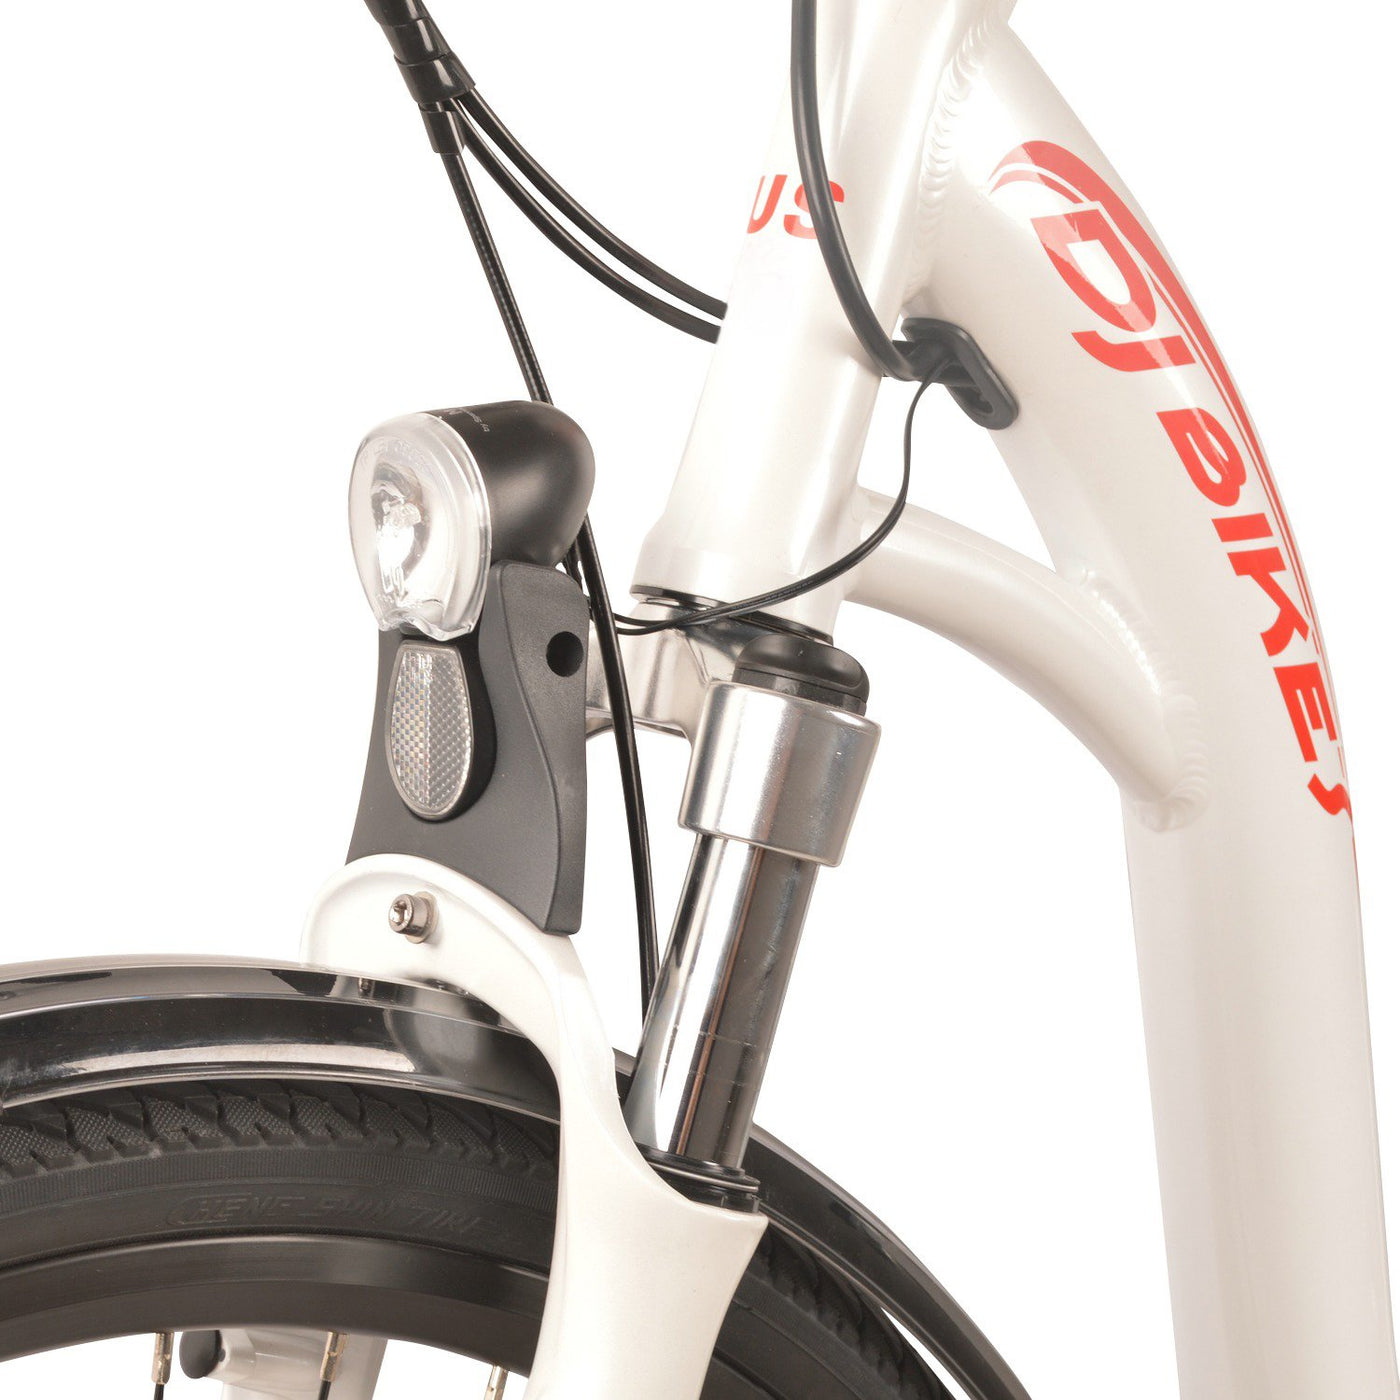 DJ City Bike, best electric commuter bike, equipped with integrated front headlight